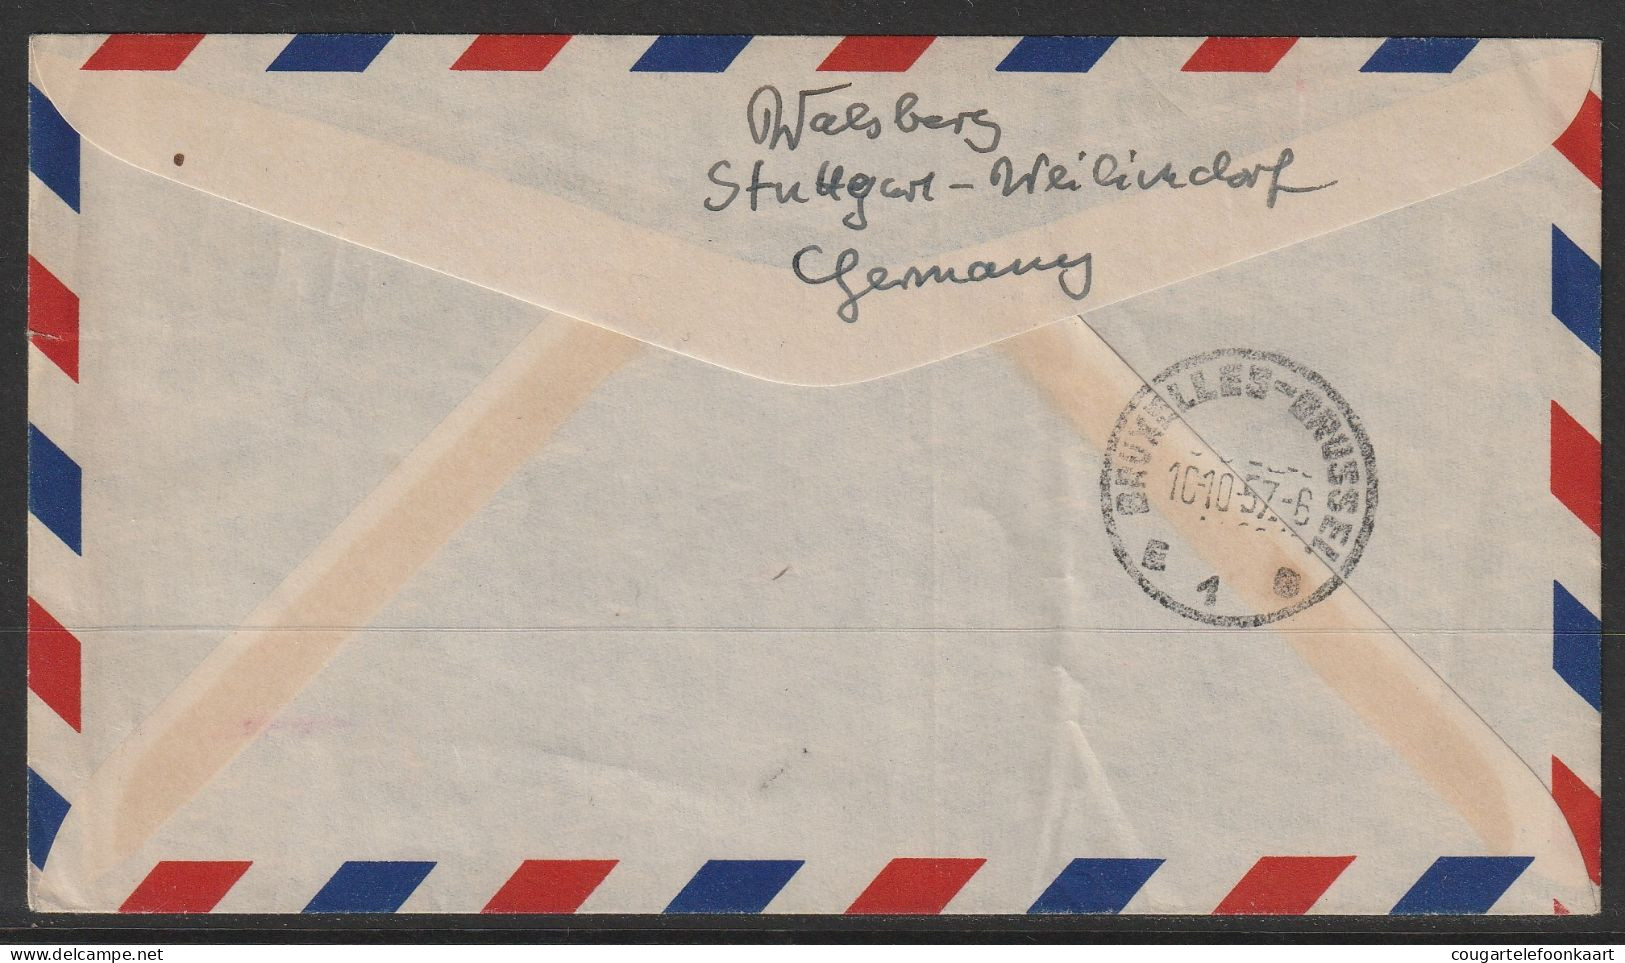 1957, Sabena, First Flight Cover, Bruxelles-Istanbul, Feeder Mail - Aéreo